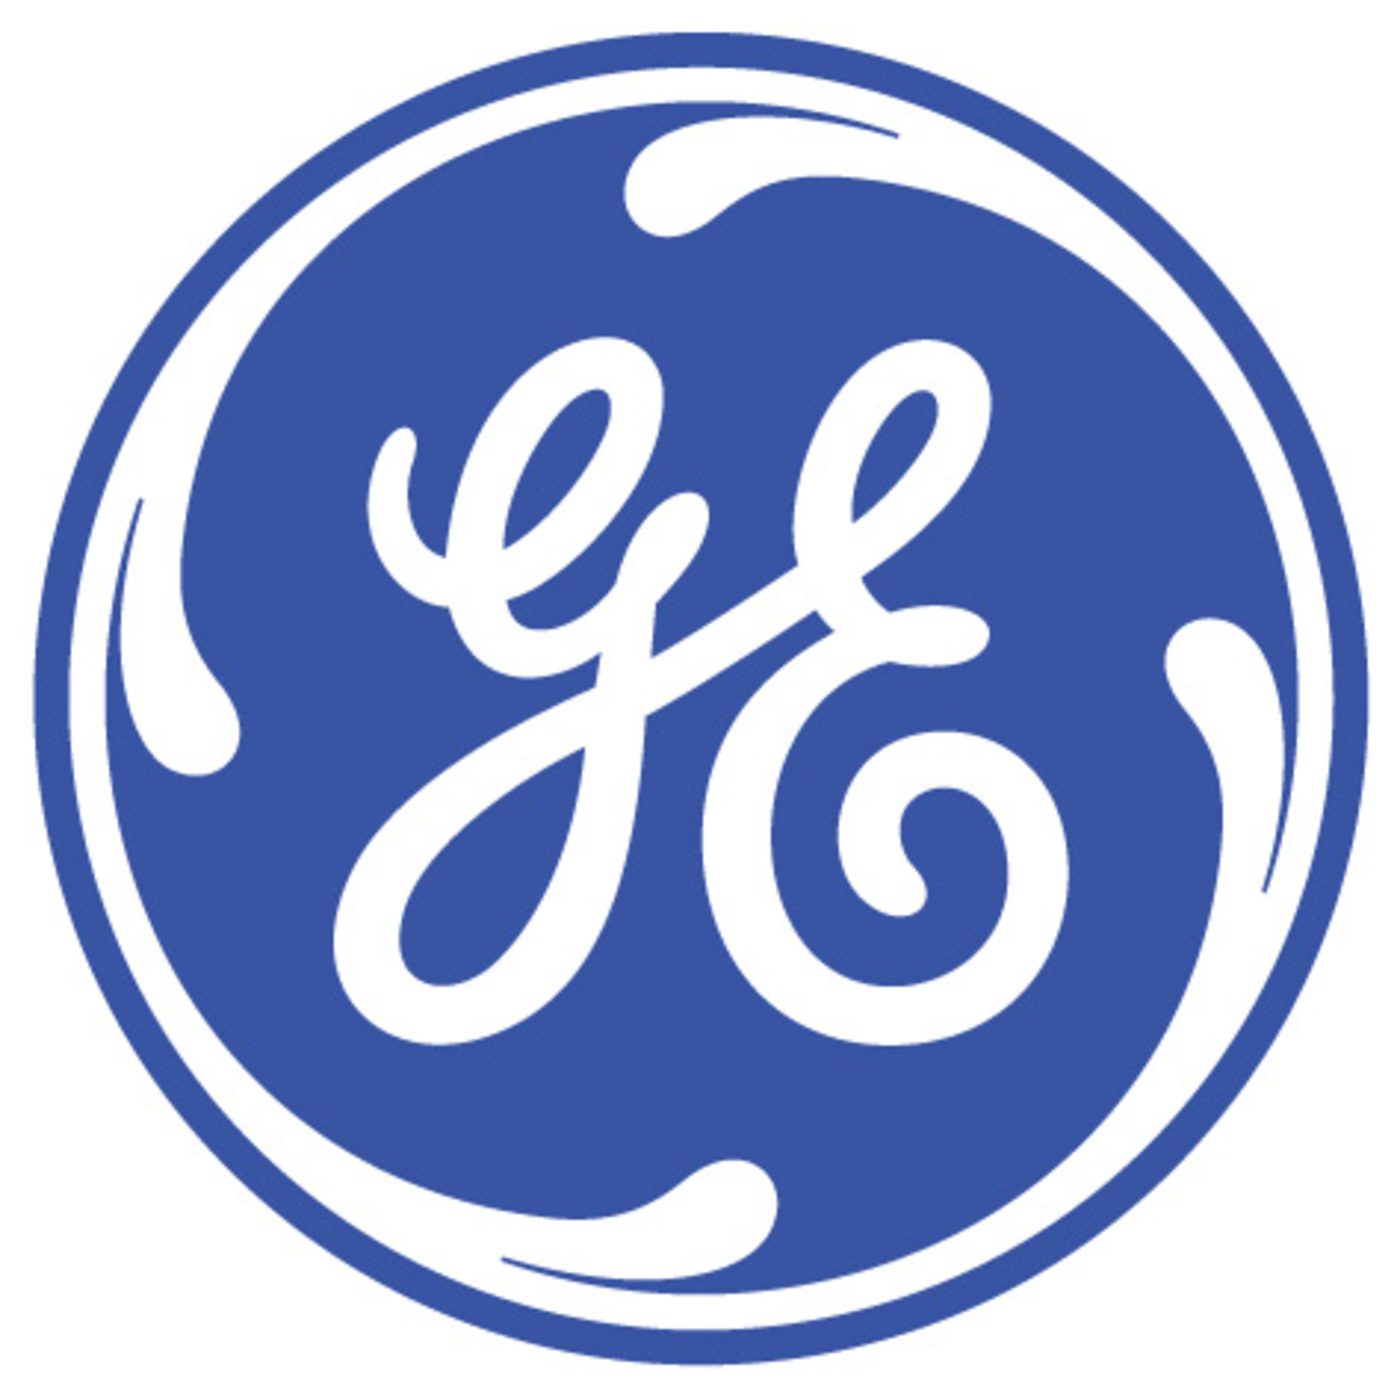 GE Aviation Hiring Event on July 19